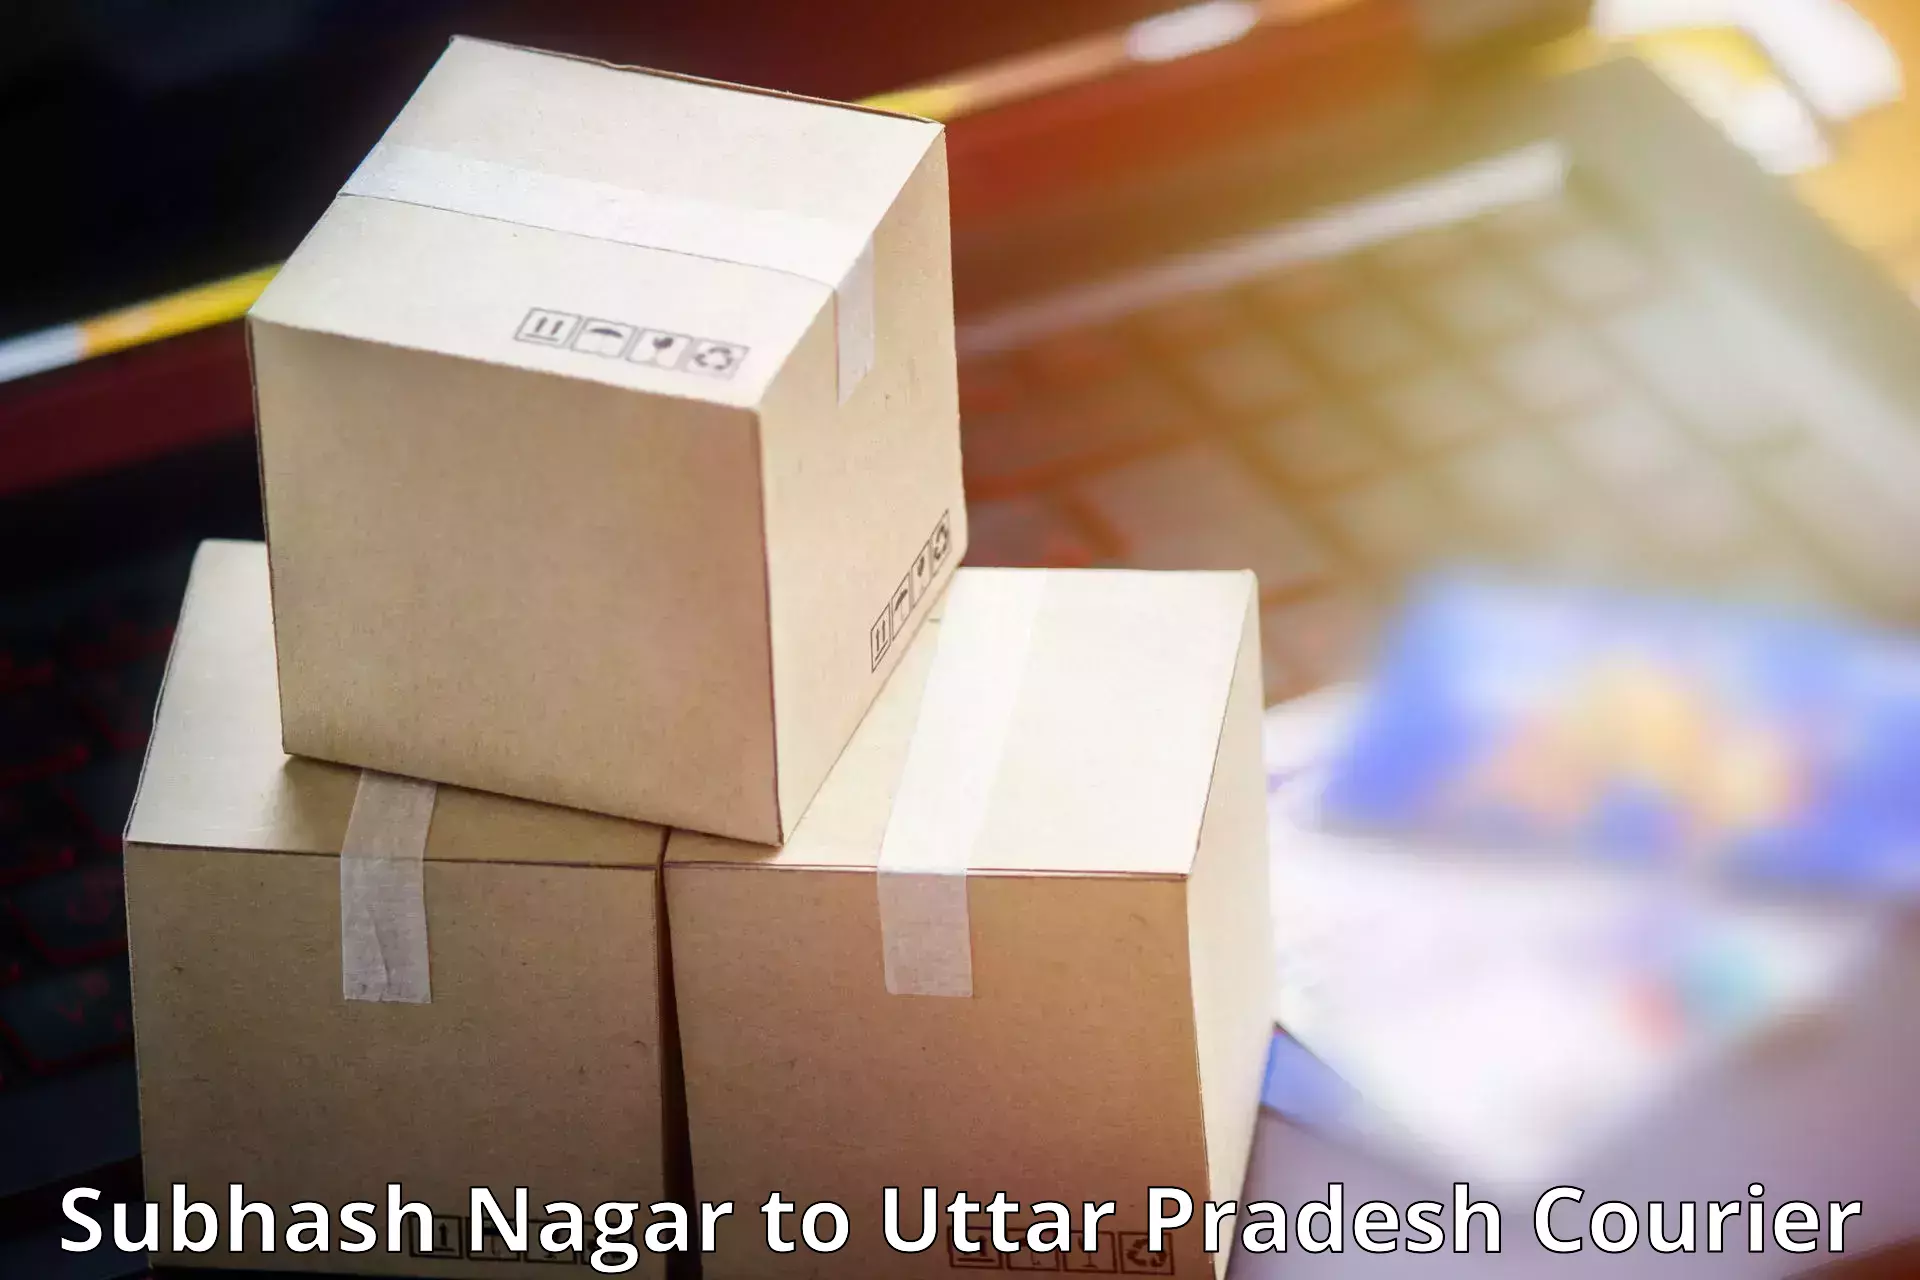 Customizable delivery plans Subhash Nagar to Allahabad